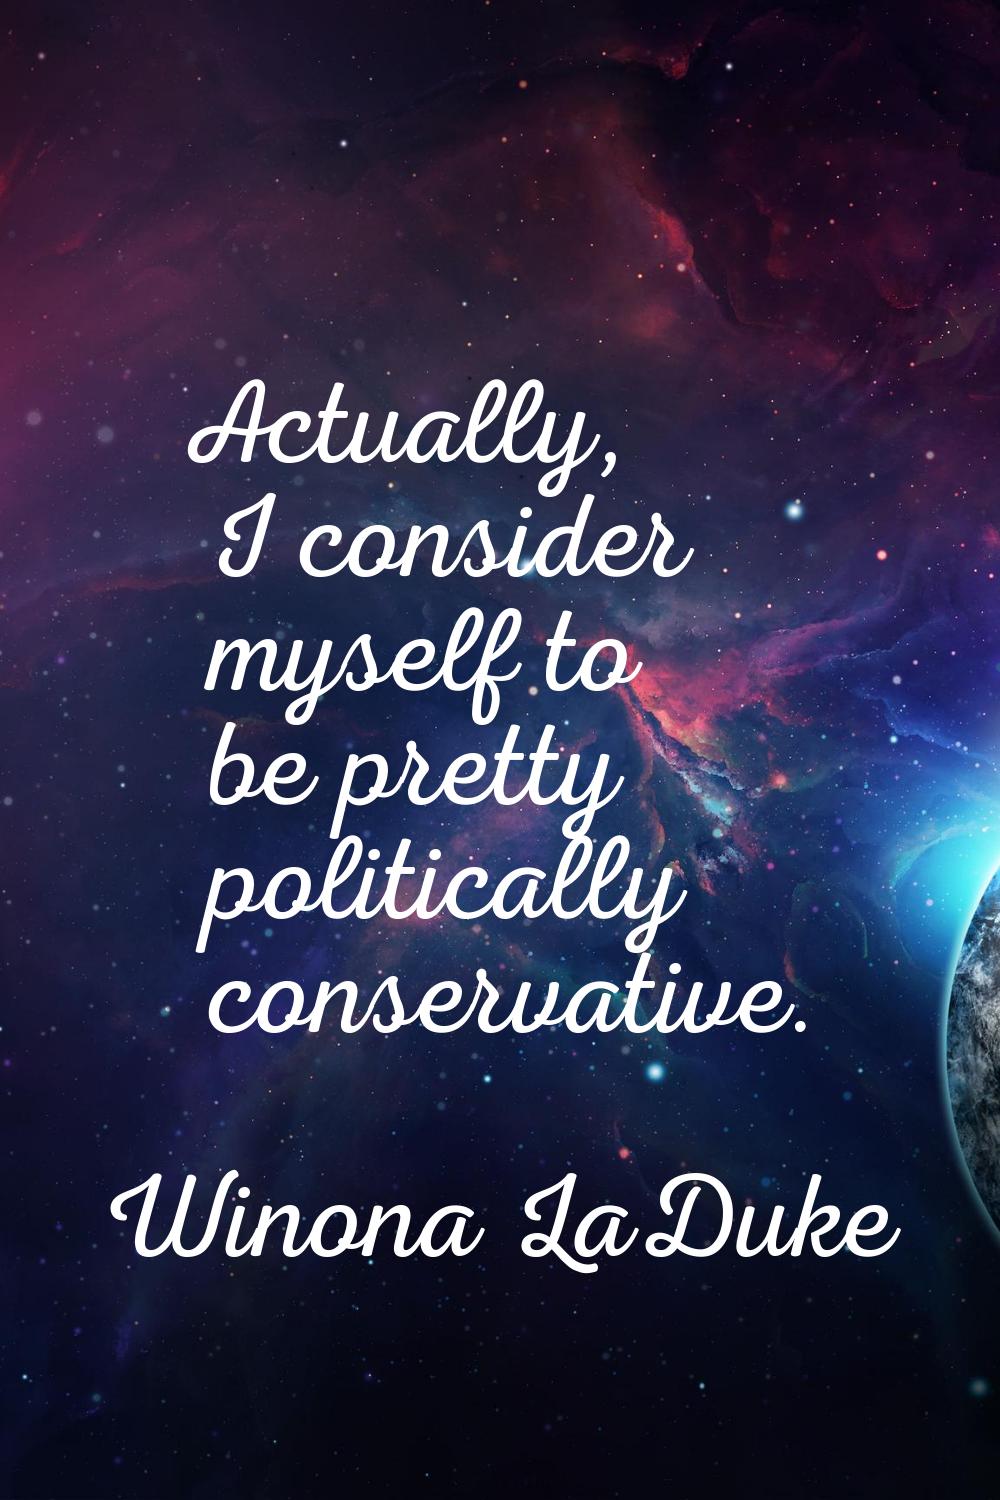 Actually, I consider myself to be pretty politically conservative.